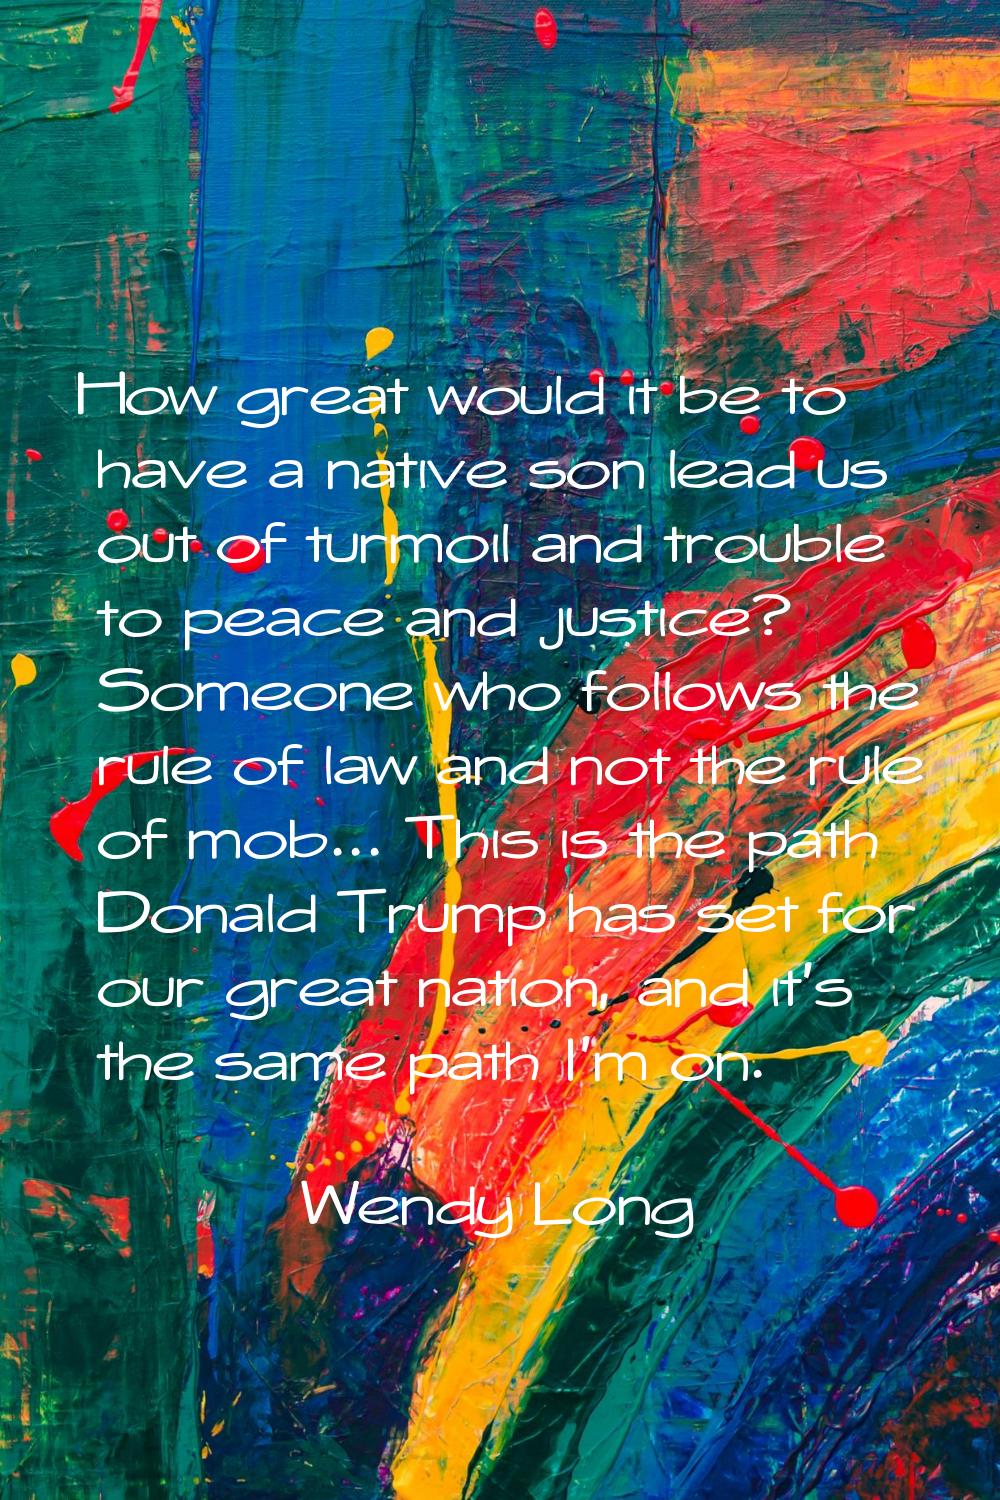 How great would it be to have a native son lead us out of turmoil and trouble to peace and justice?